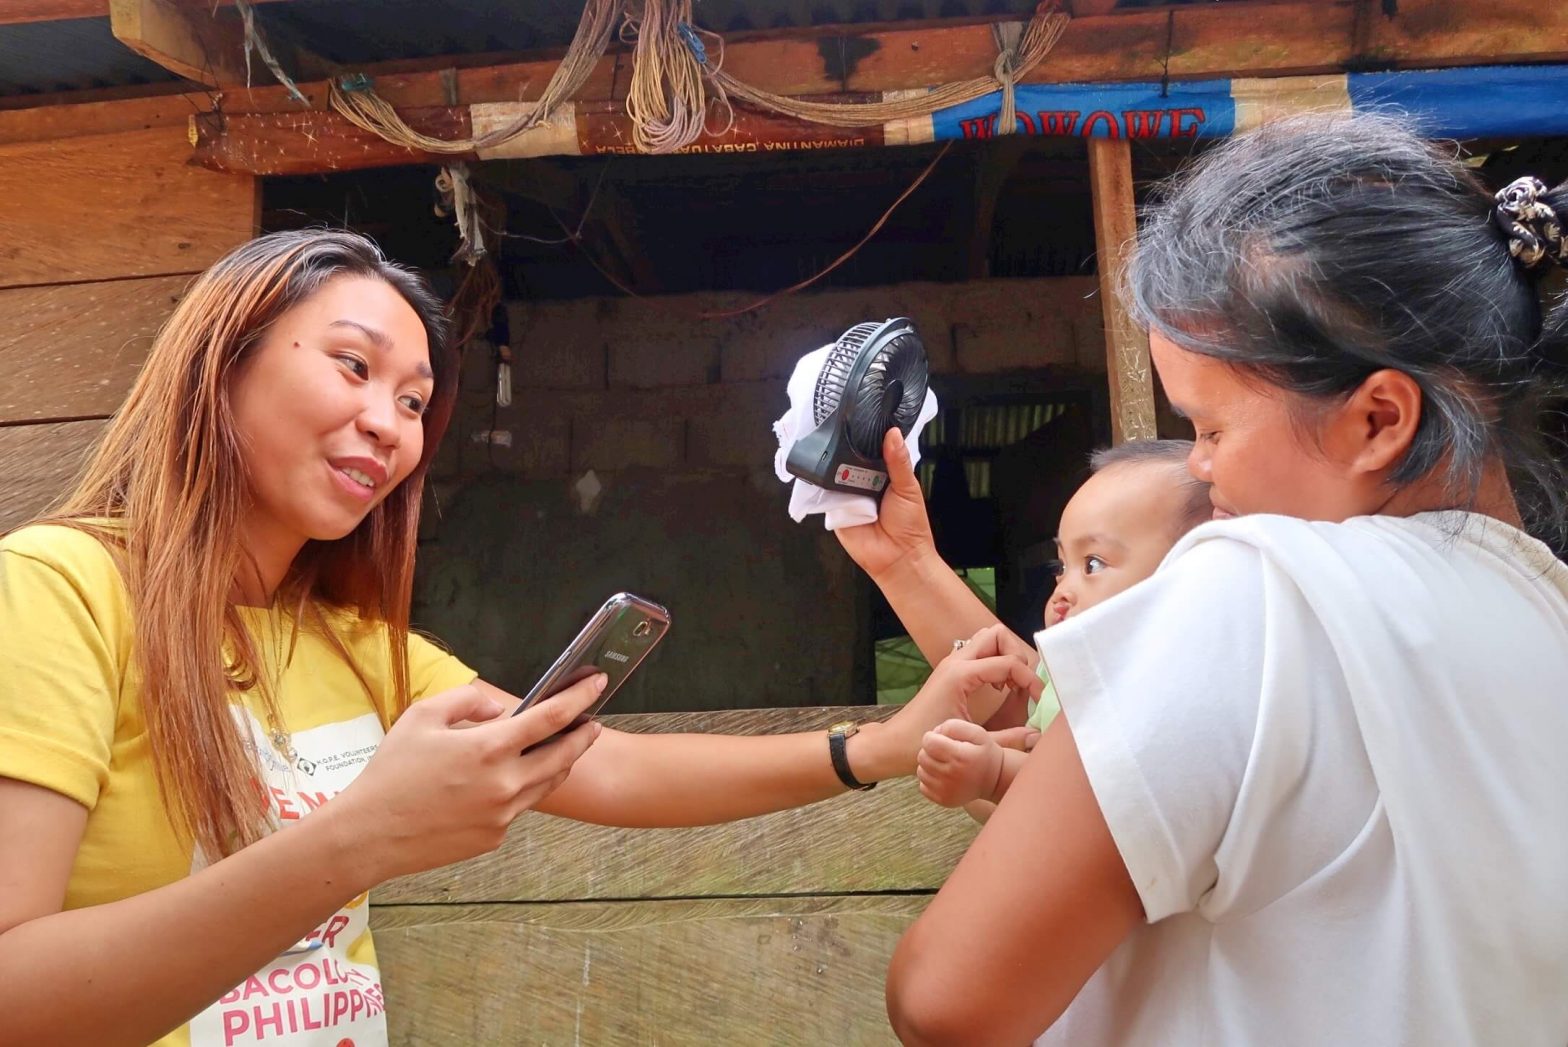 Volunteers get boost from Smart-initiated Operation Smile app